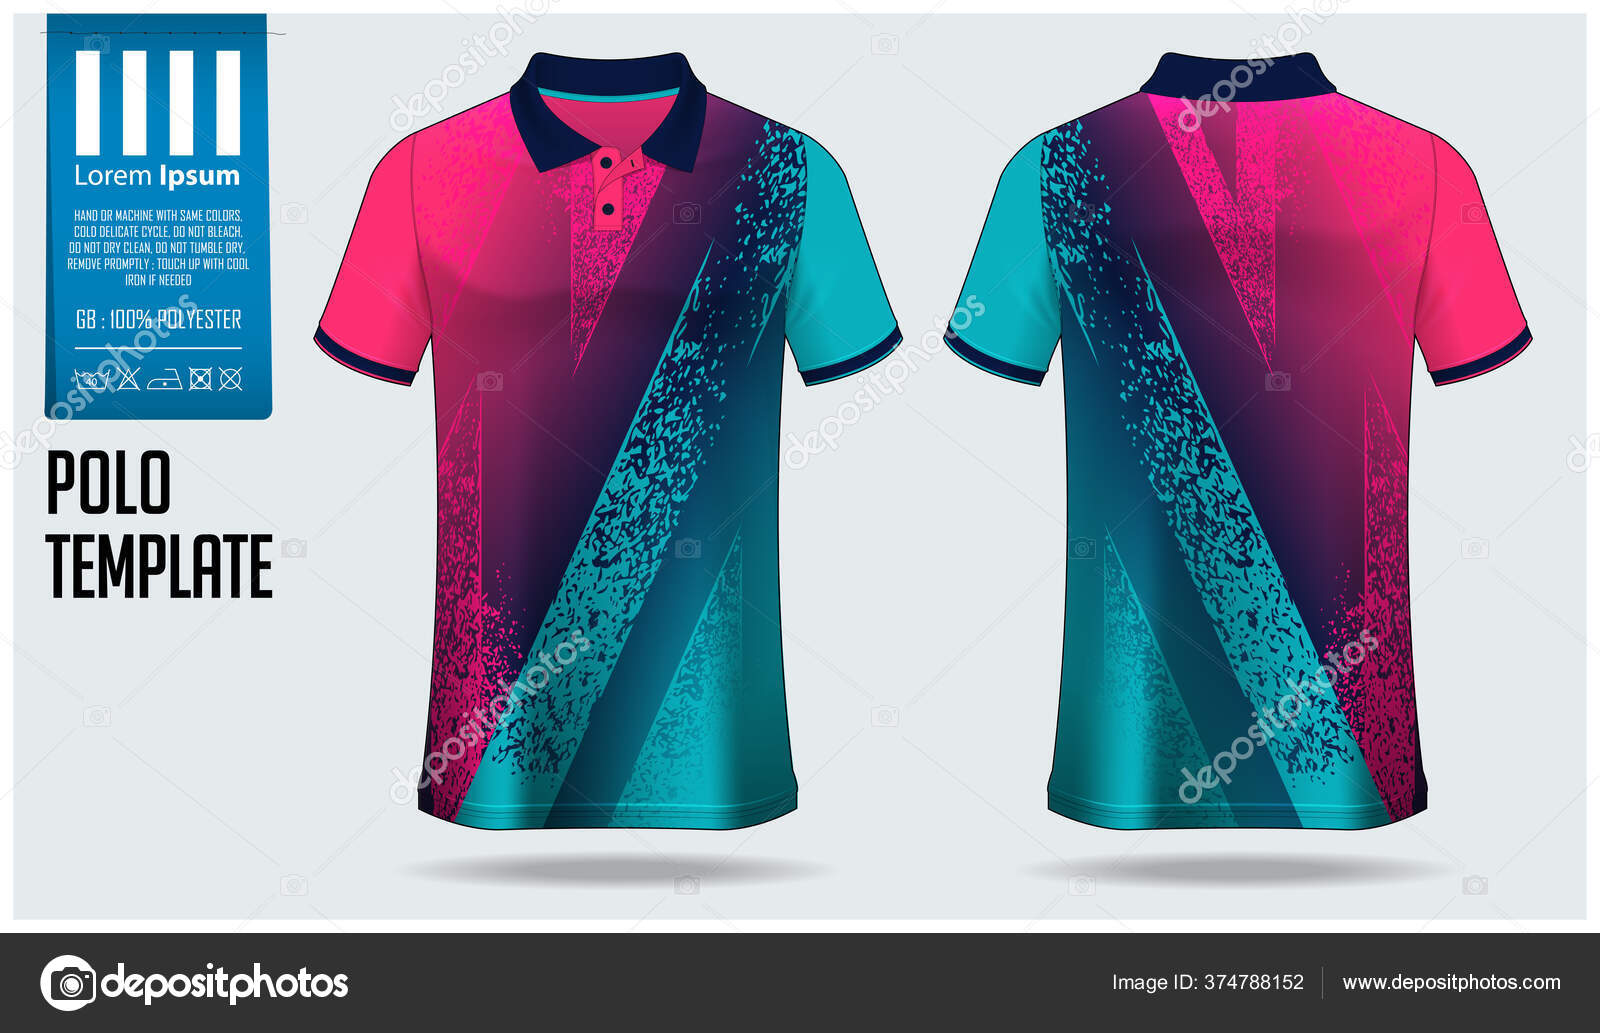 Polo t-shirt mockup template design for soccer jersey, football